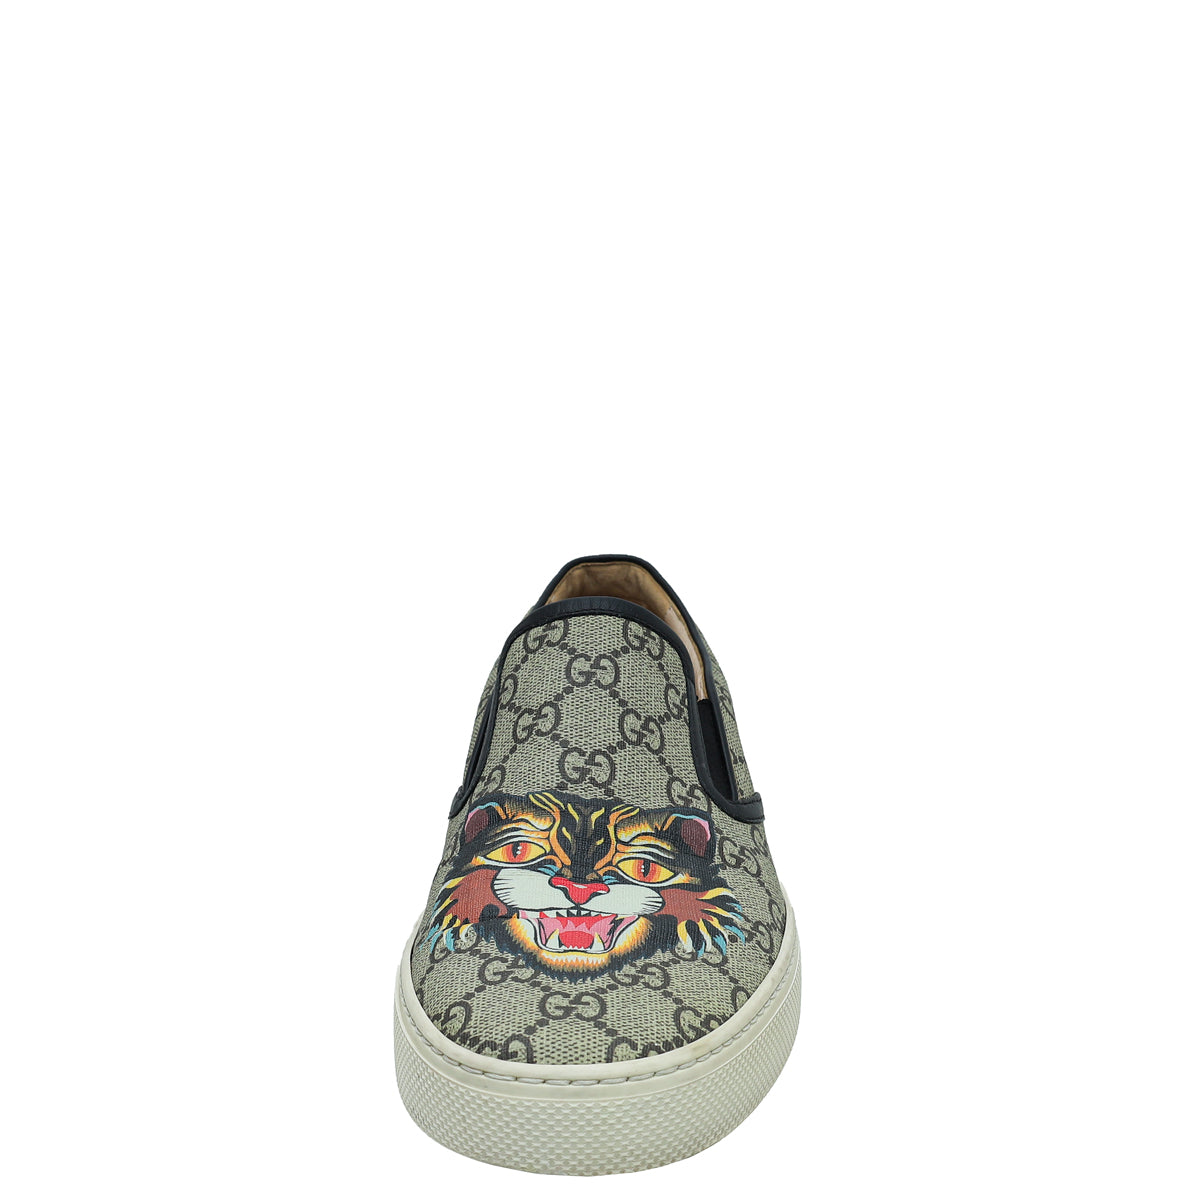 Gucci Bicolor GG Supreme Angry Cat Men's Slip-On Sneakers 8